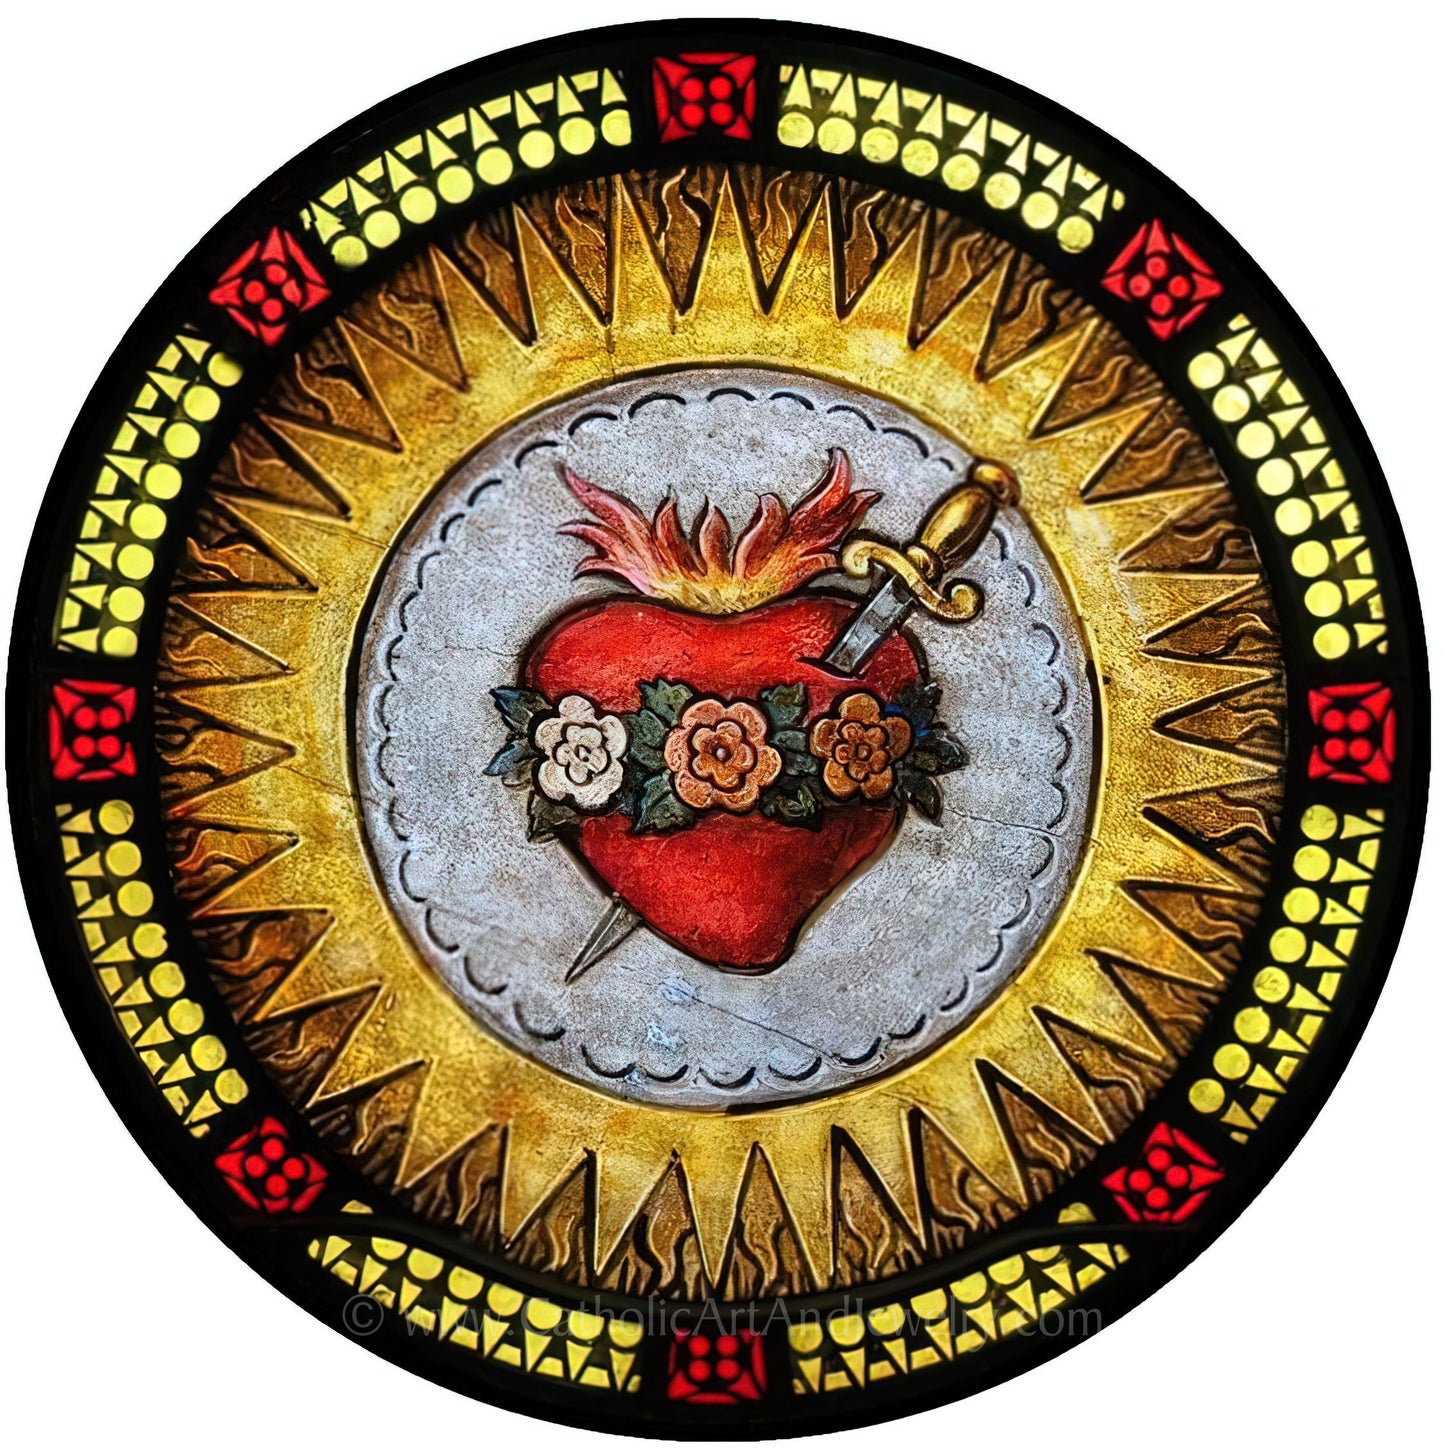 Sticker–Immaculate Heart of Mary–from Stained Glass – Catholic Sticker – High Quality Vinyl